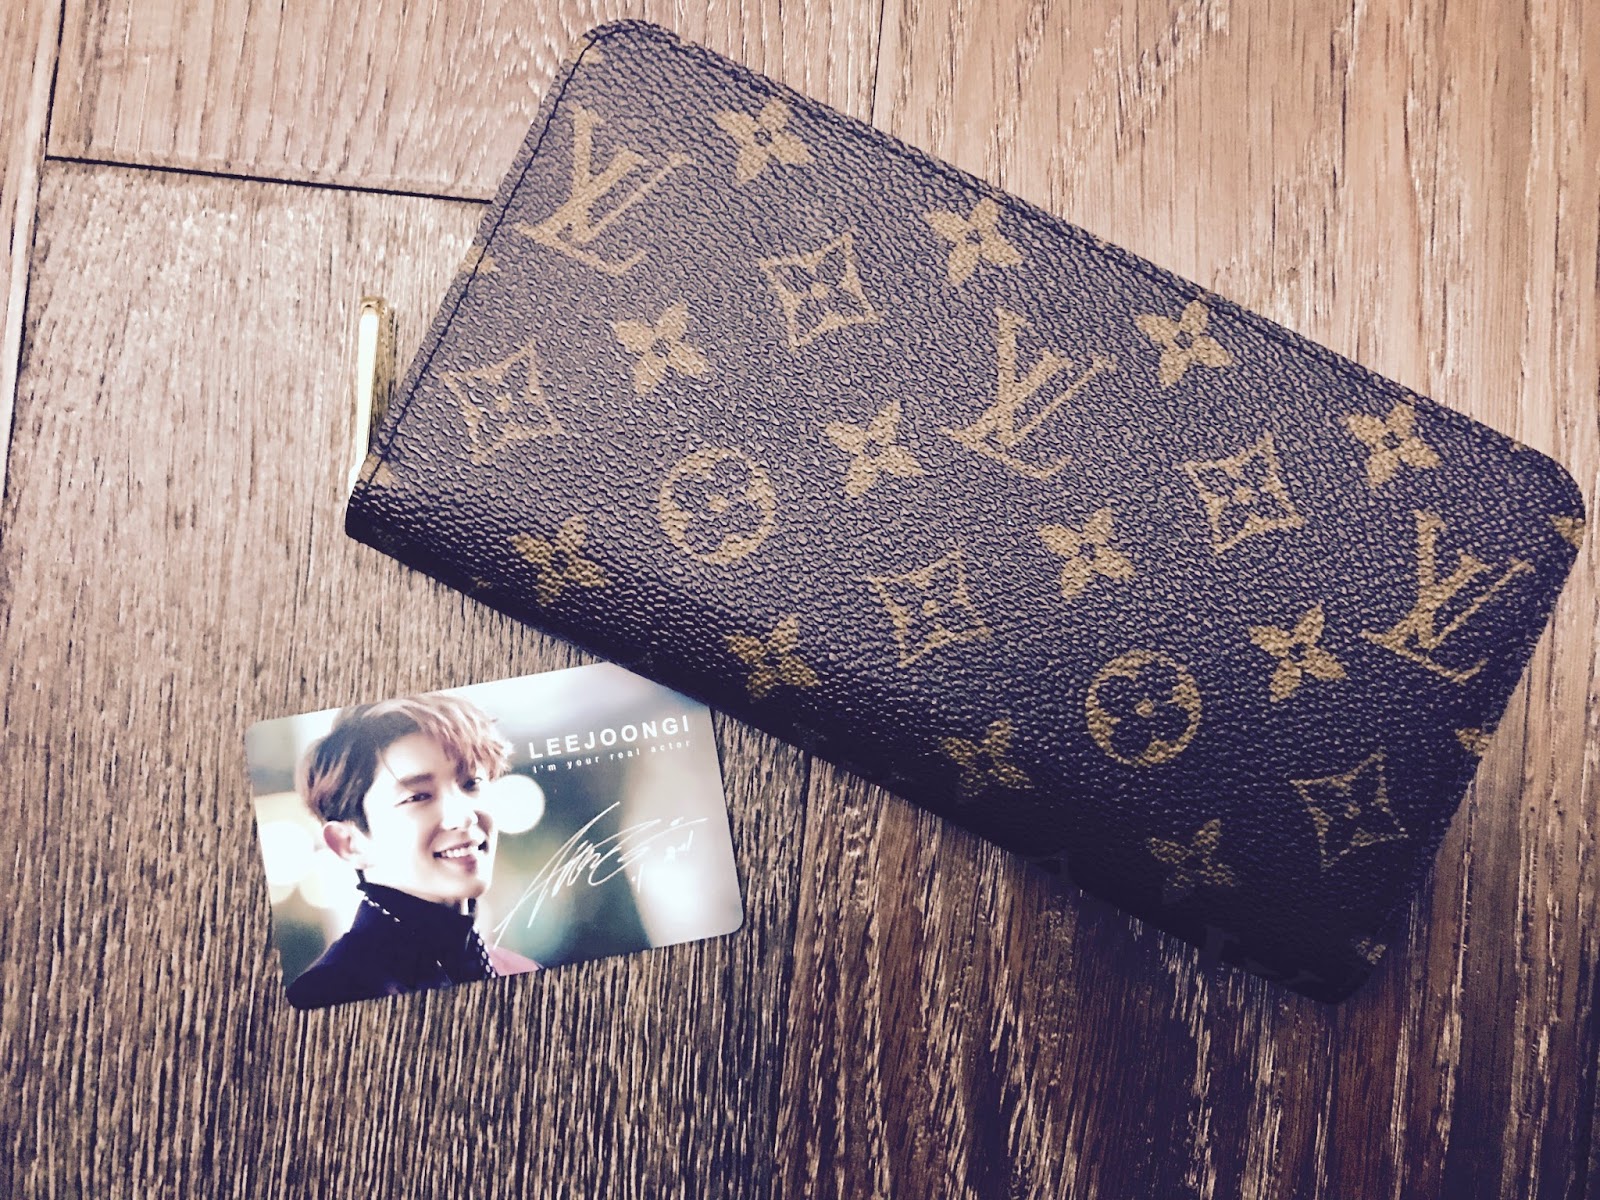 just received this gorgeous LV card holder as birthday present